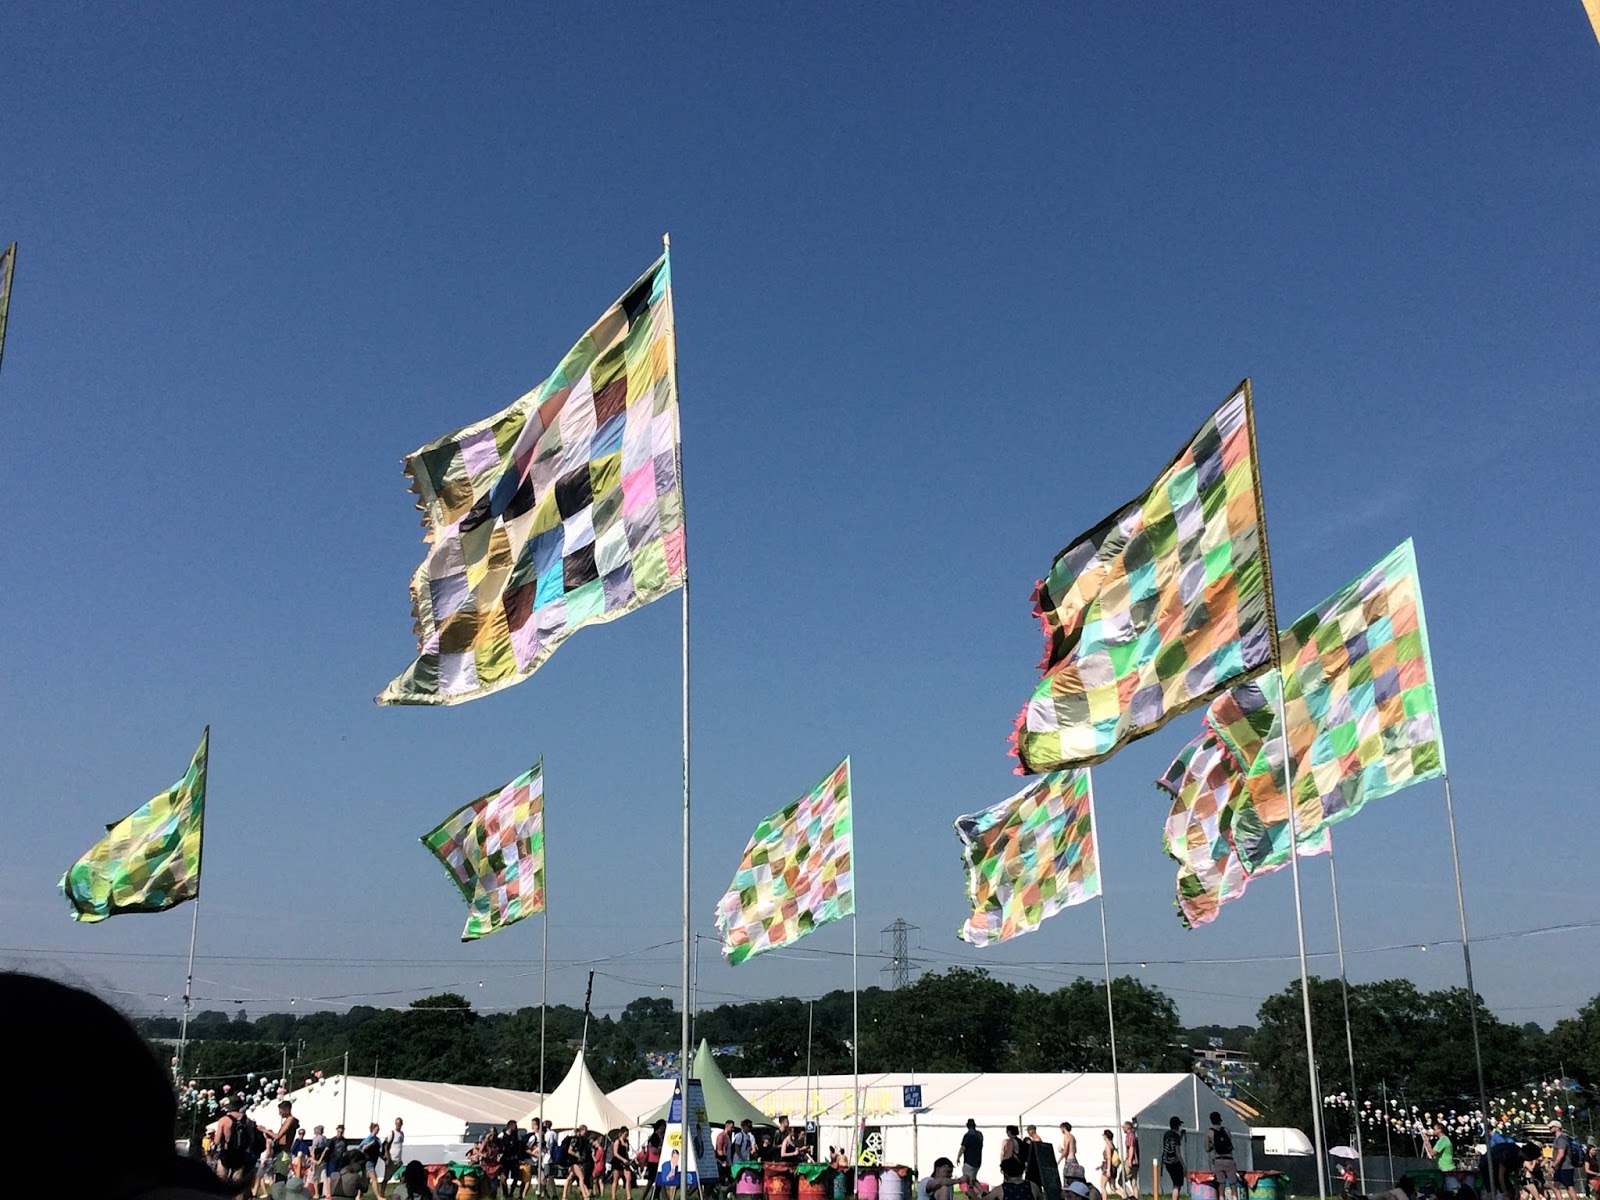 Flags waving in blue sky at Glastonbury Festival 2017